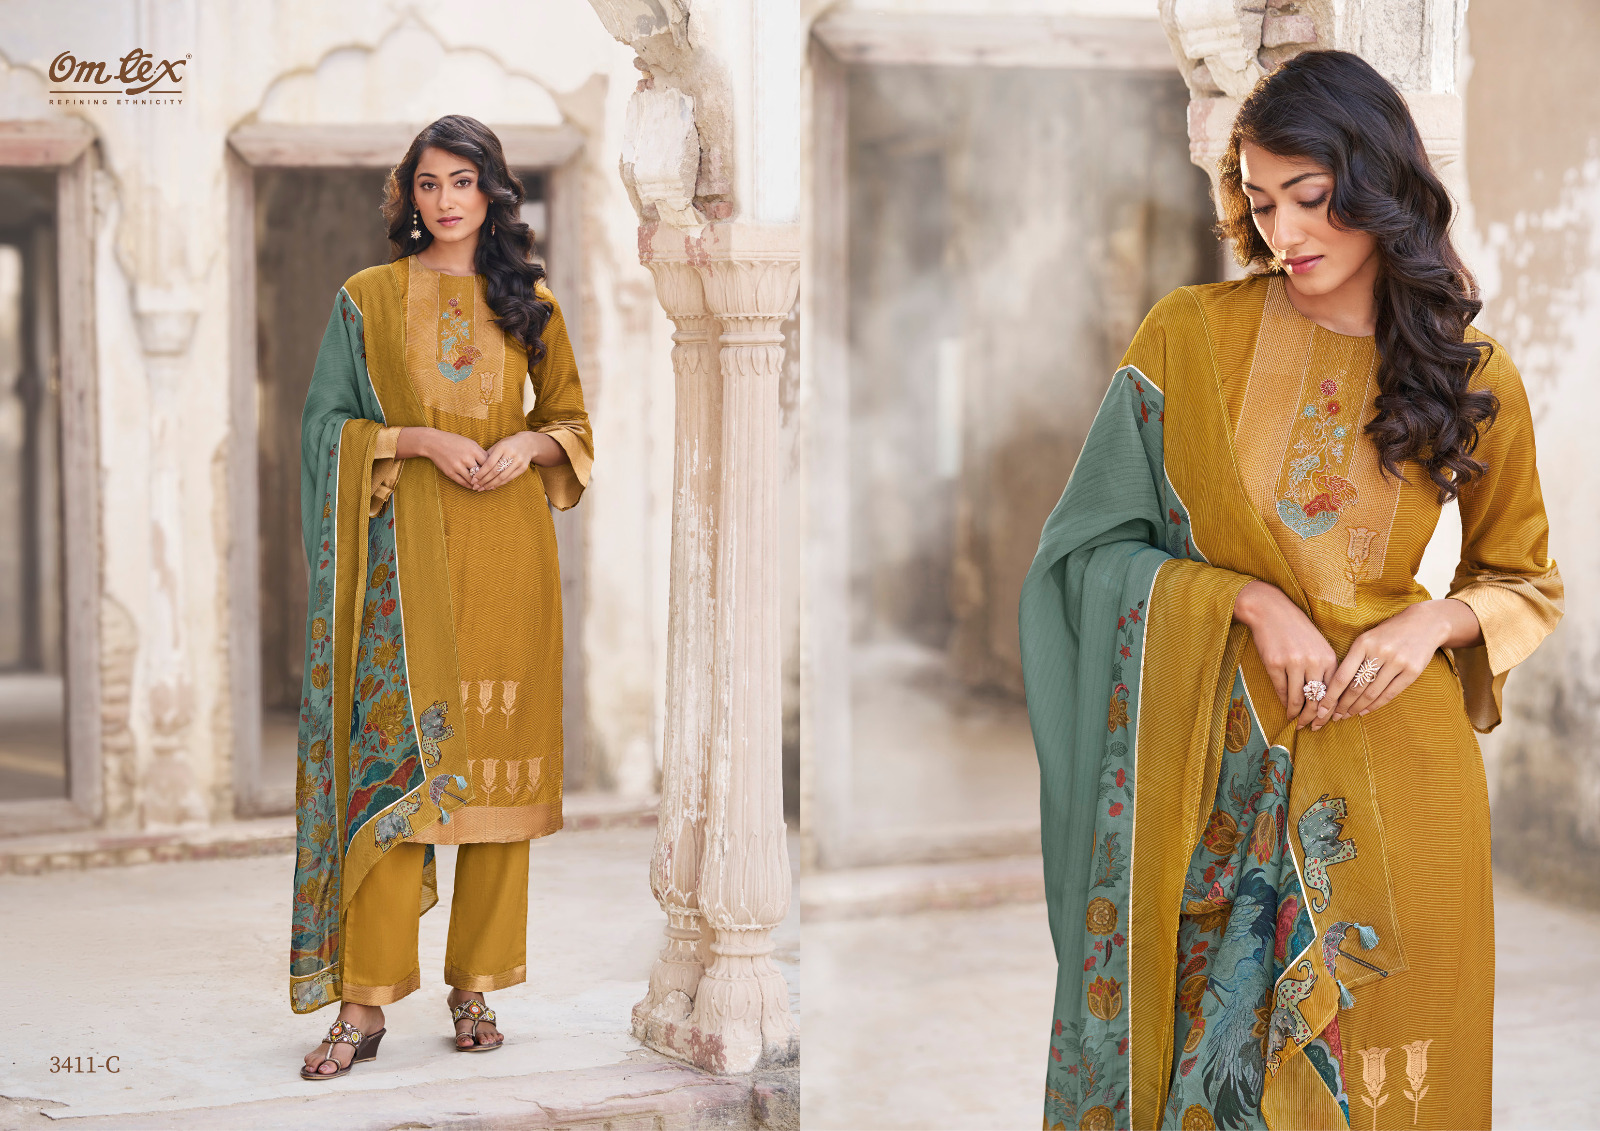 Omtex Aakriti Vol 2 collection 3